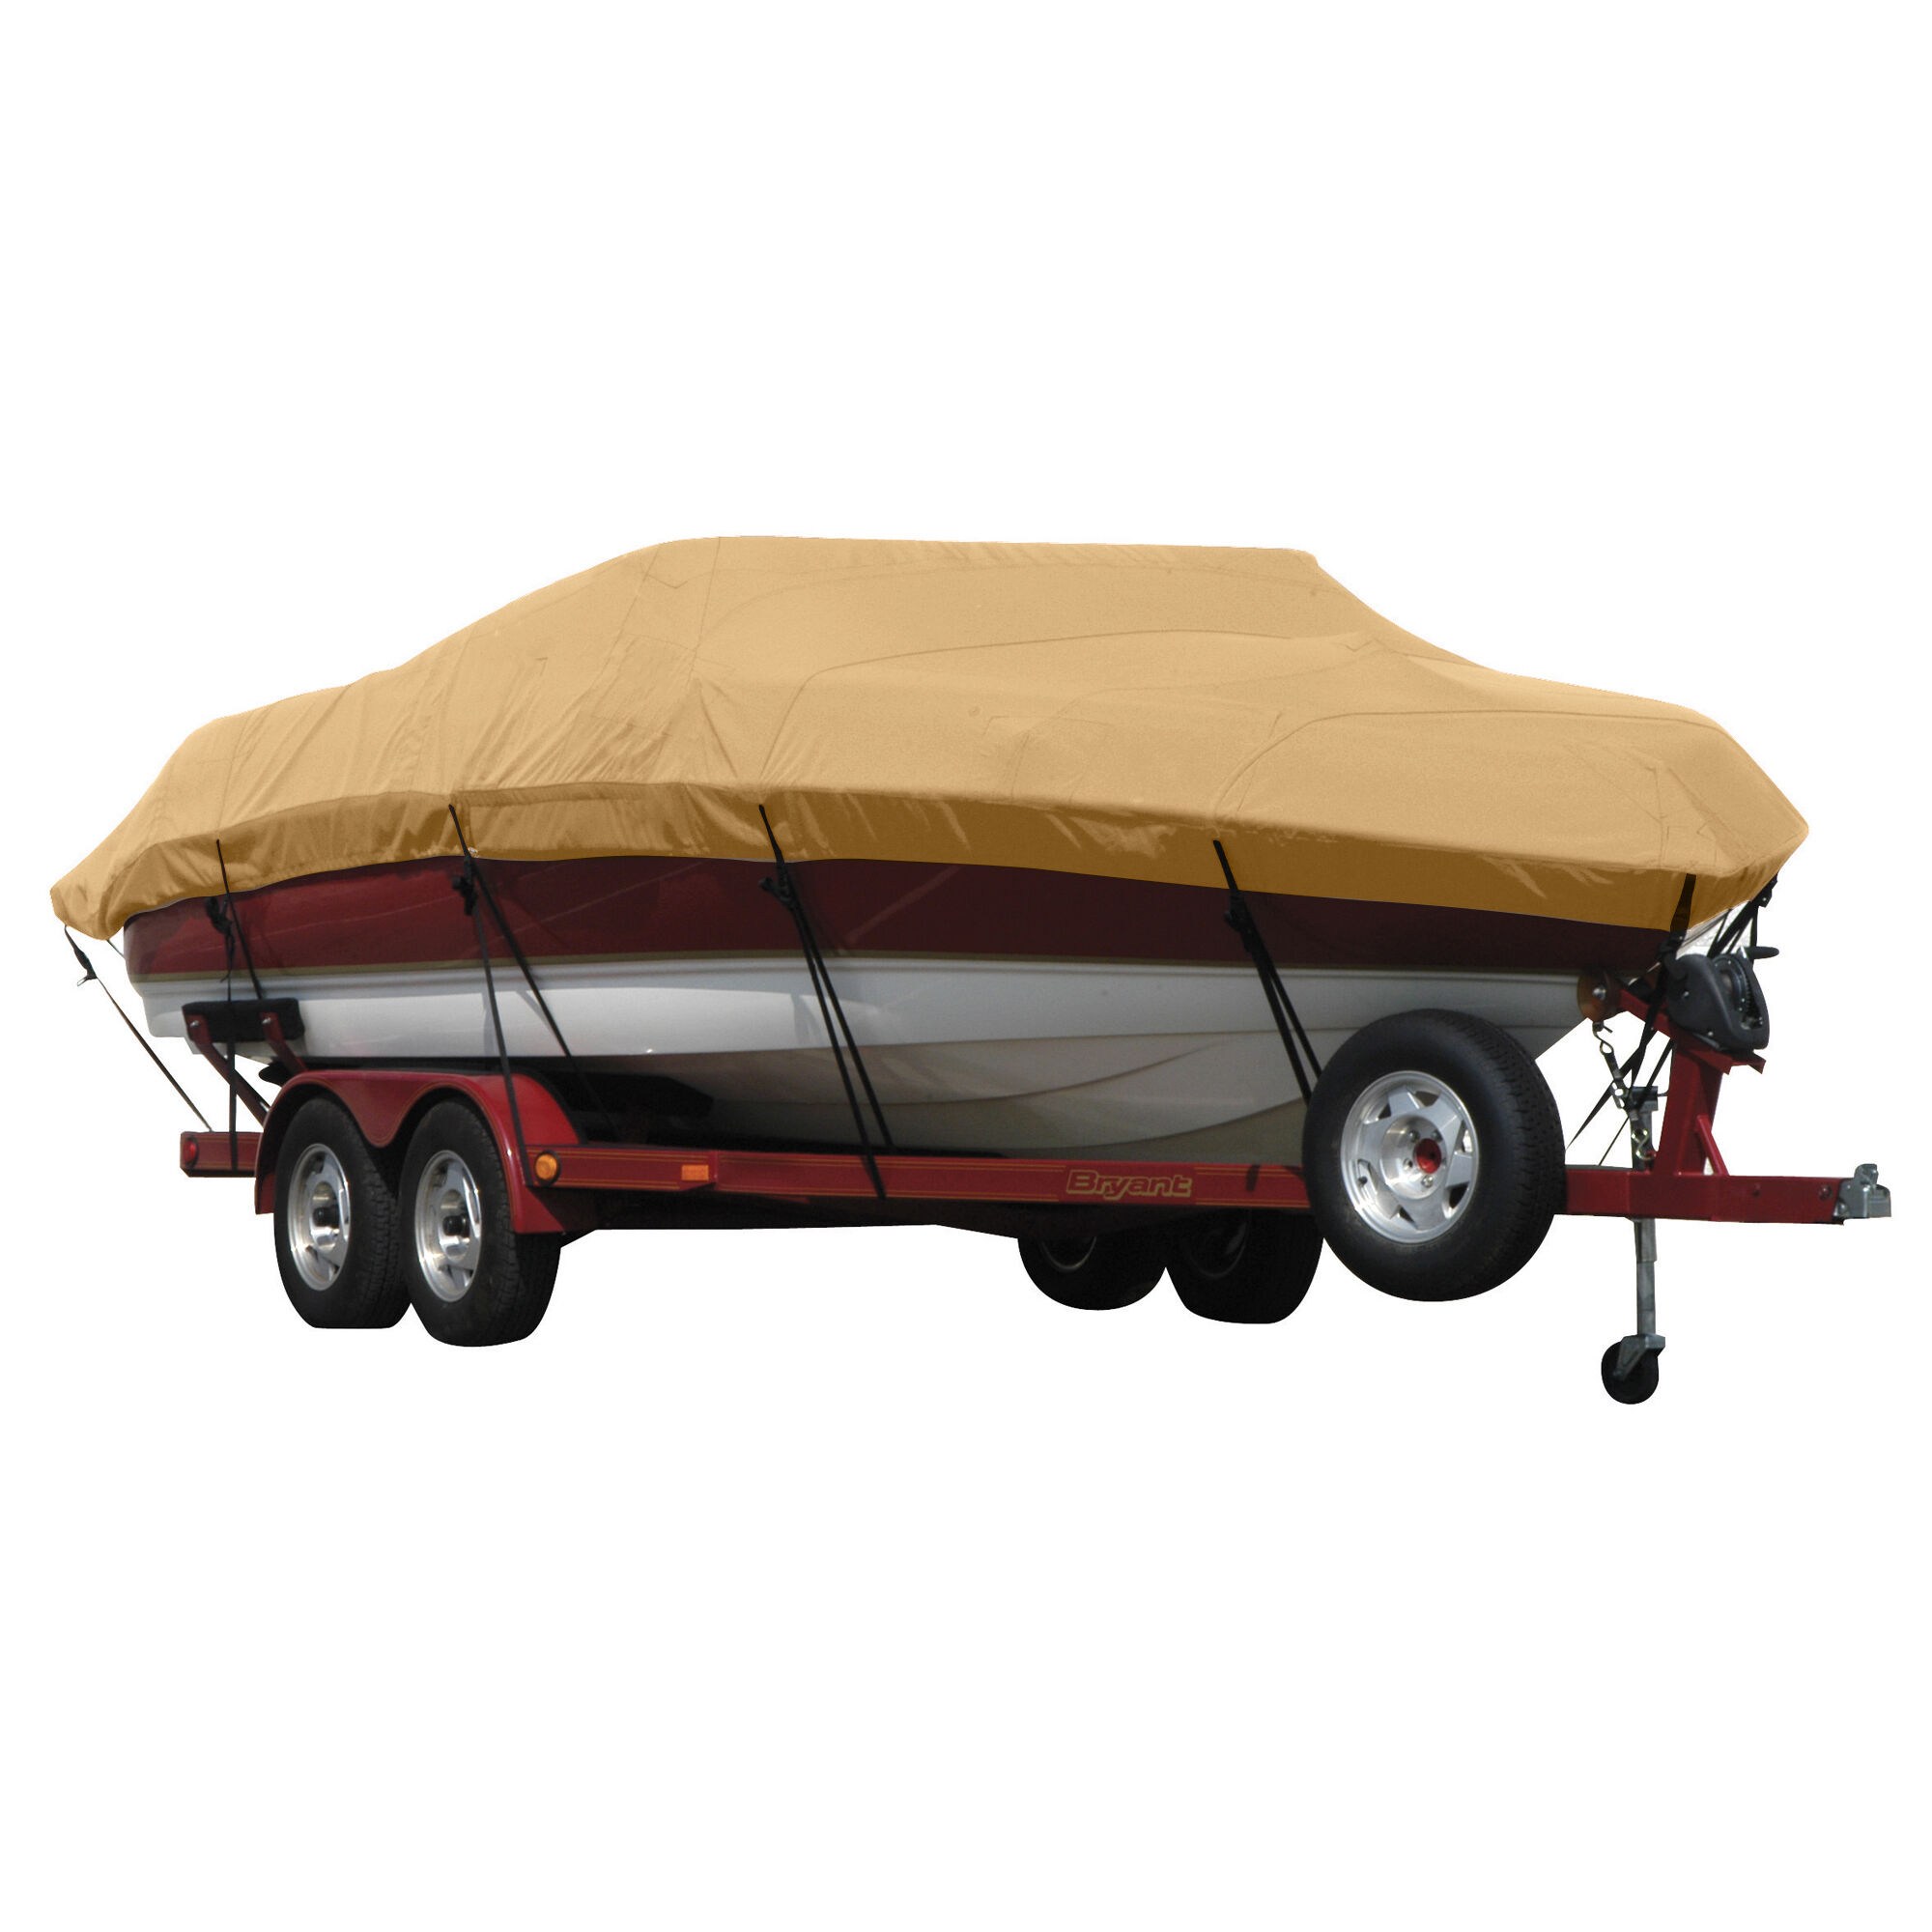 Covermate Exact Fit Sunbrella Boat Cover for Procraft 200 200 Side Console w/ Shield w/ Port Trolling Motor O/B. Toast